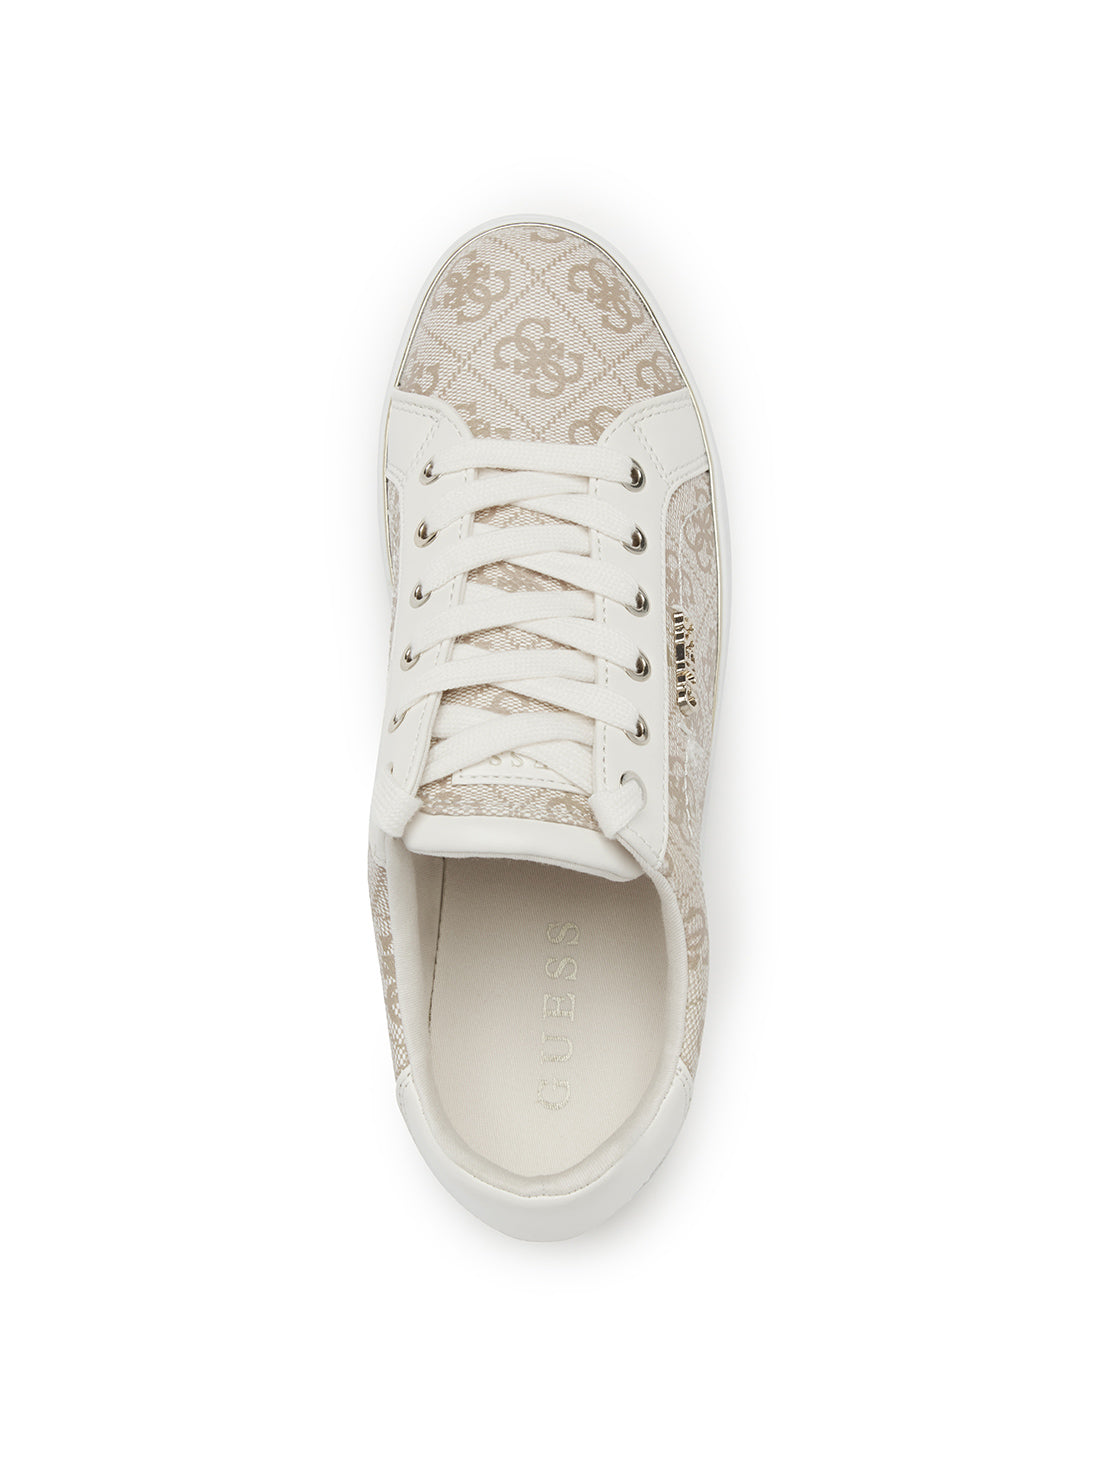 Cream Logo Beckie Sneakers | GUESS Women's Shoes | top view